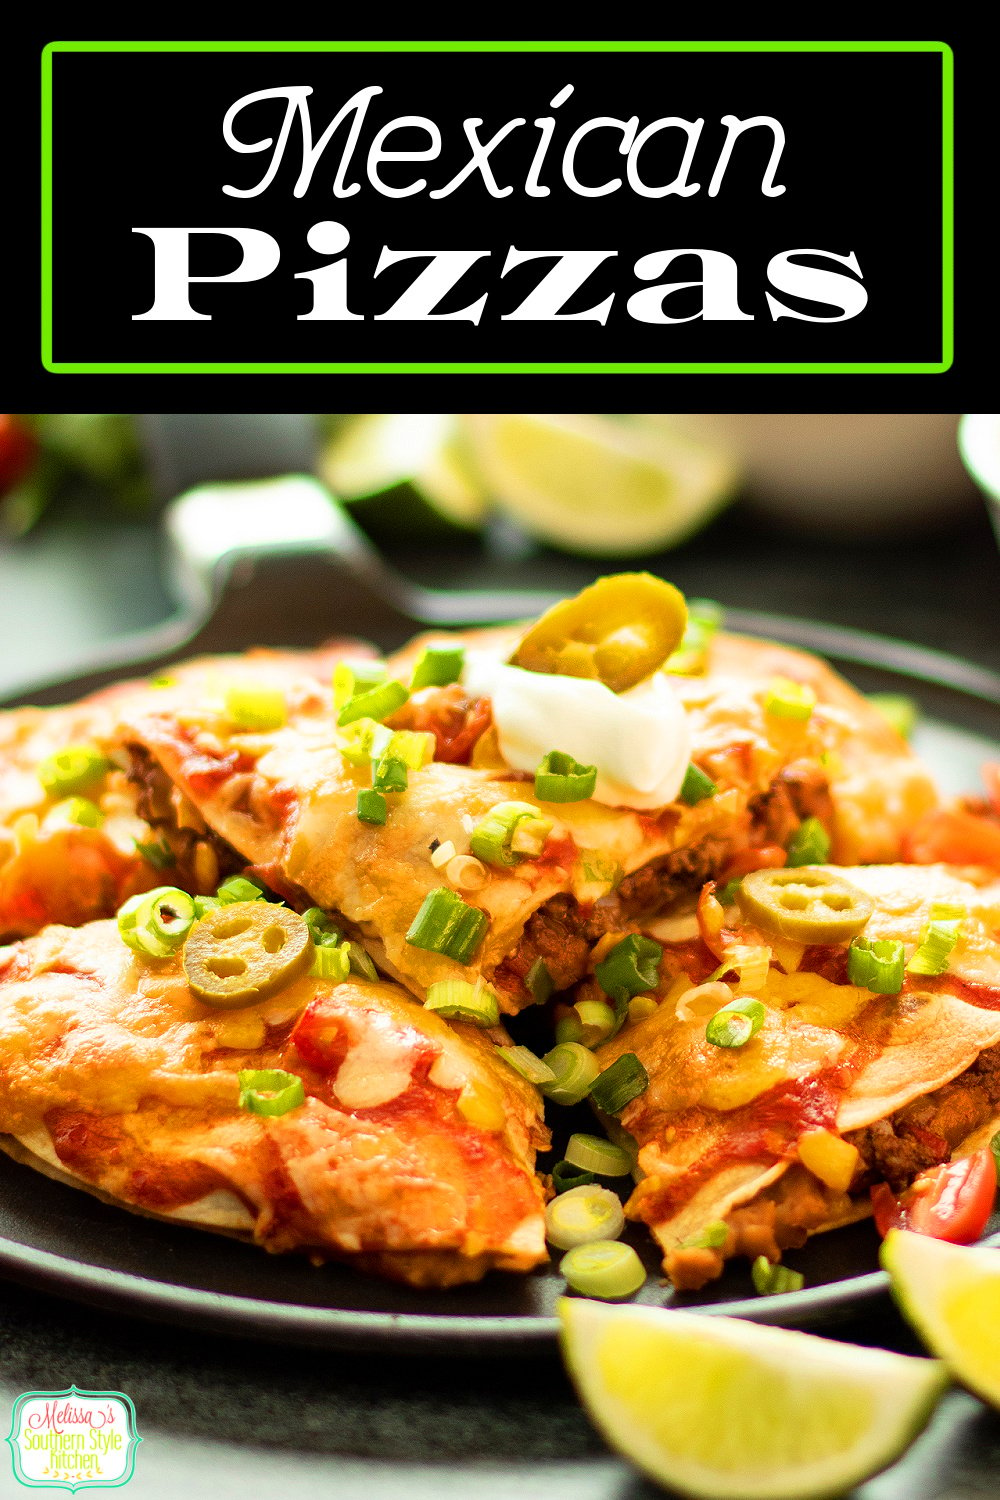 These easy copycat Taco Bell Mexican Pizzas come together in minutes and can be served with your favorite sides to round out the meal. #mexicanfood #mexicanpizzas #pizzarecipes #tacos #easygroundbeefrecipes via @melissasssk